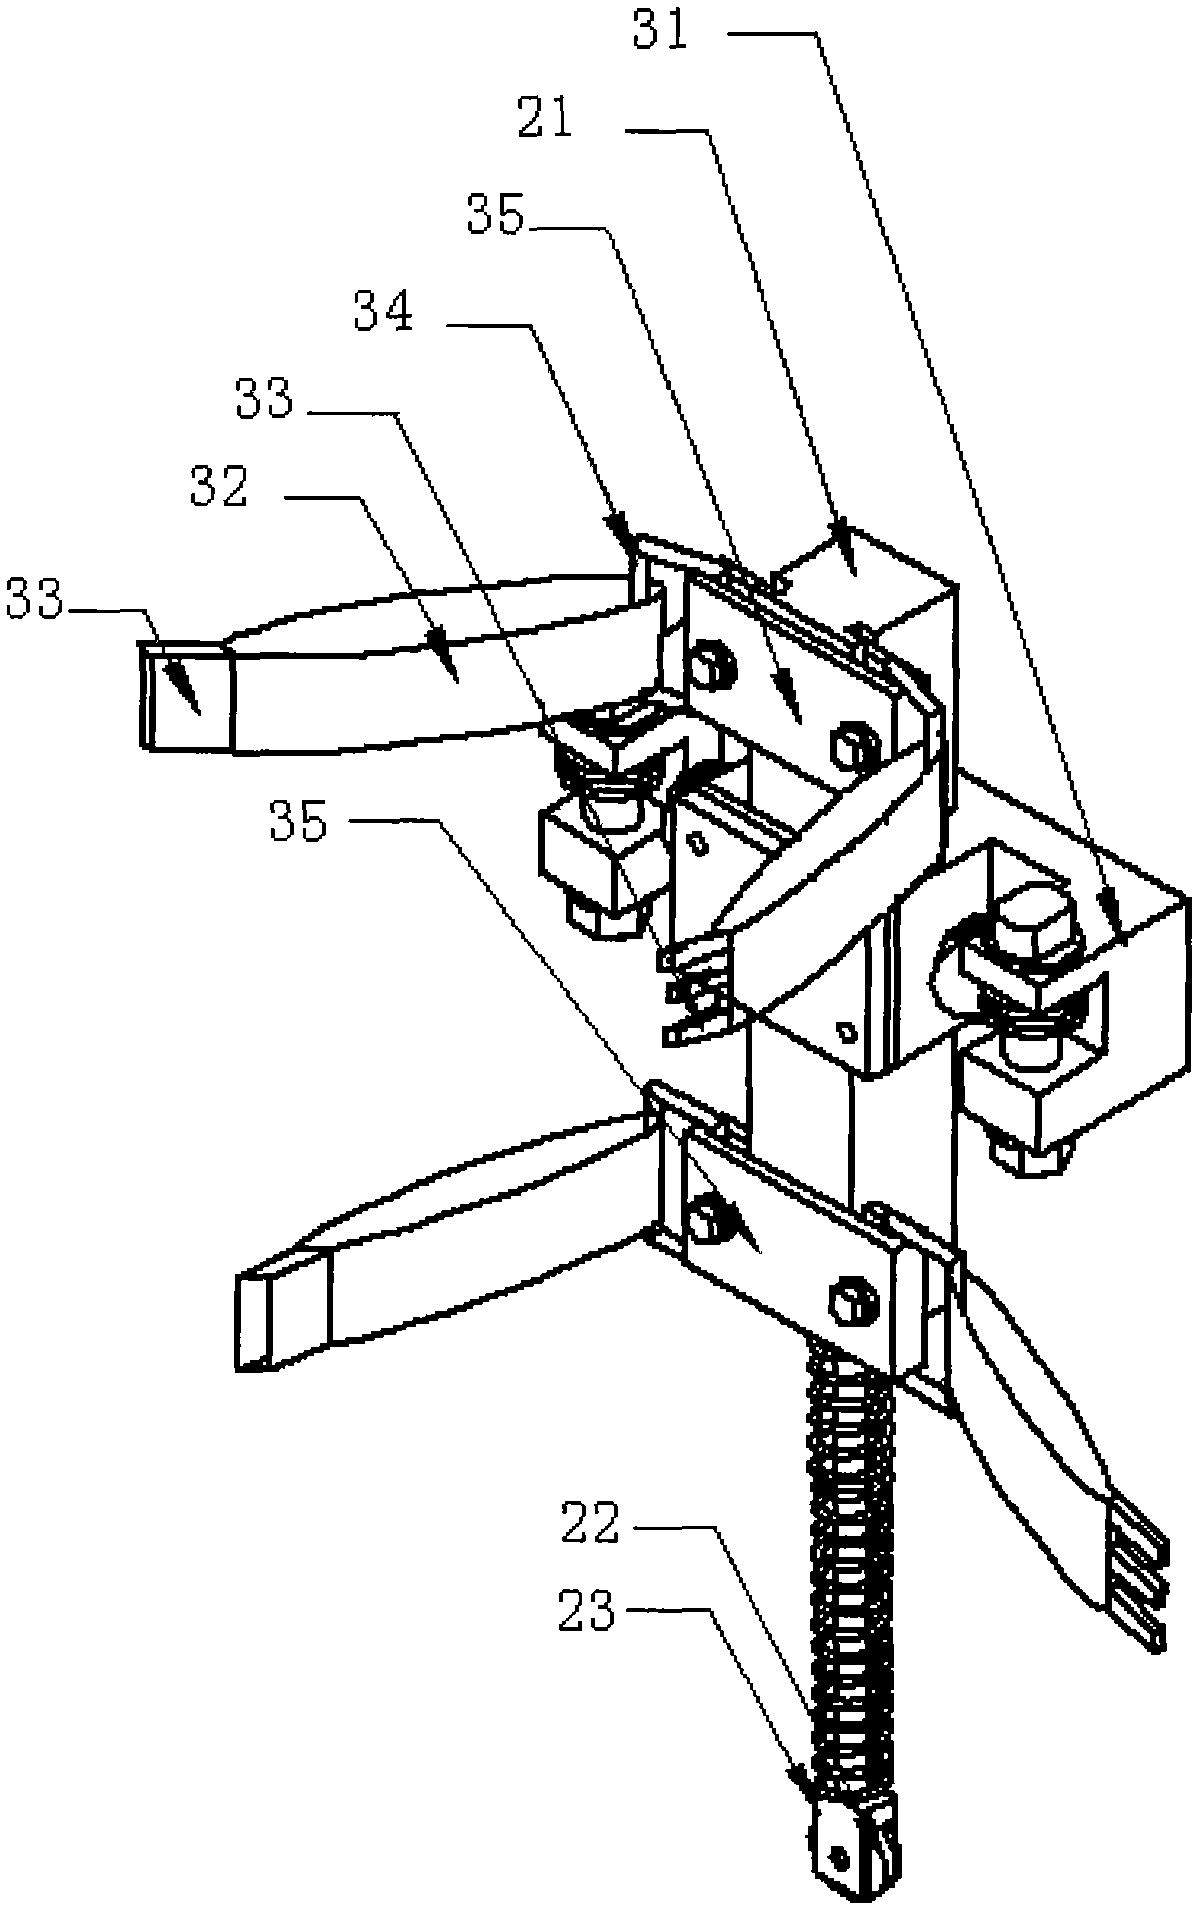 Automatic measurement device for treewalk growth